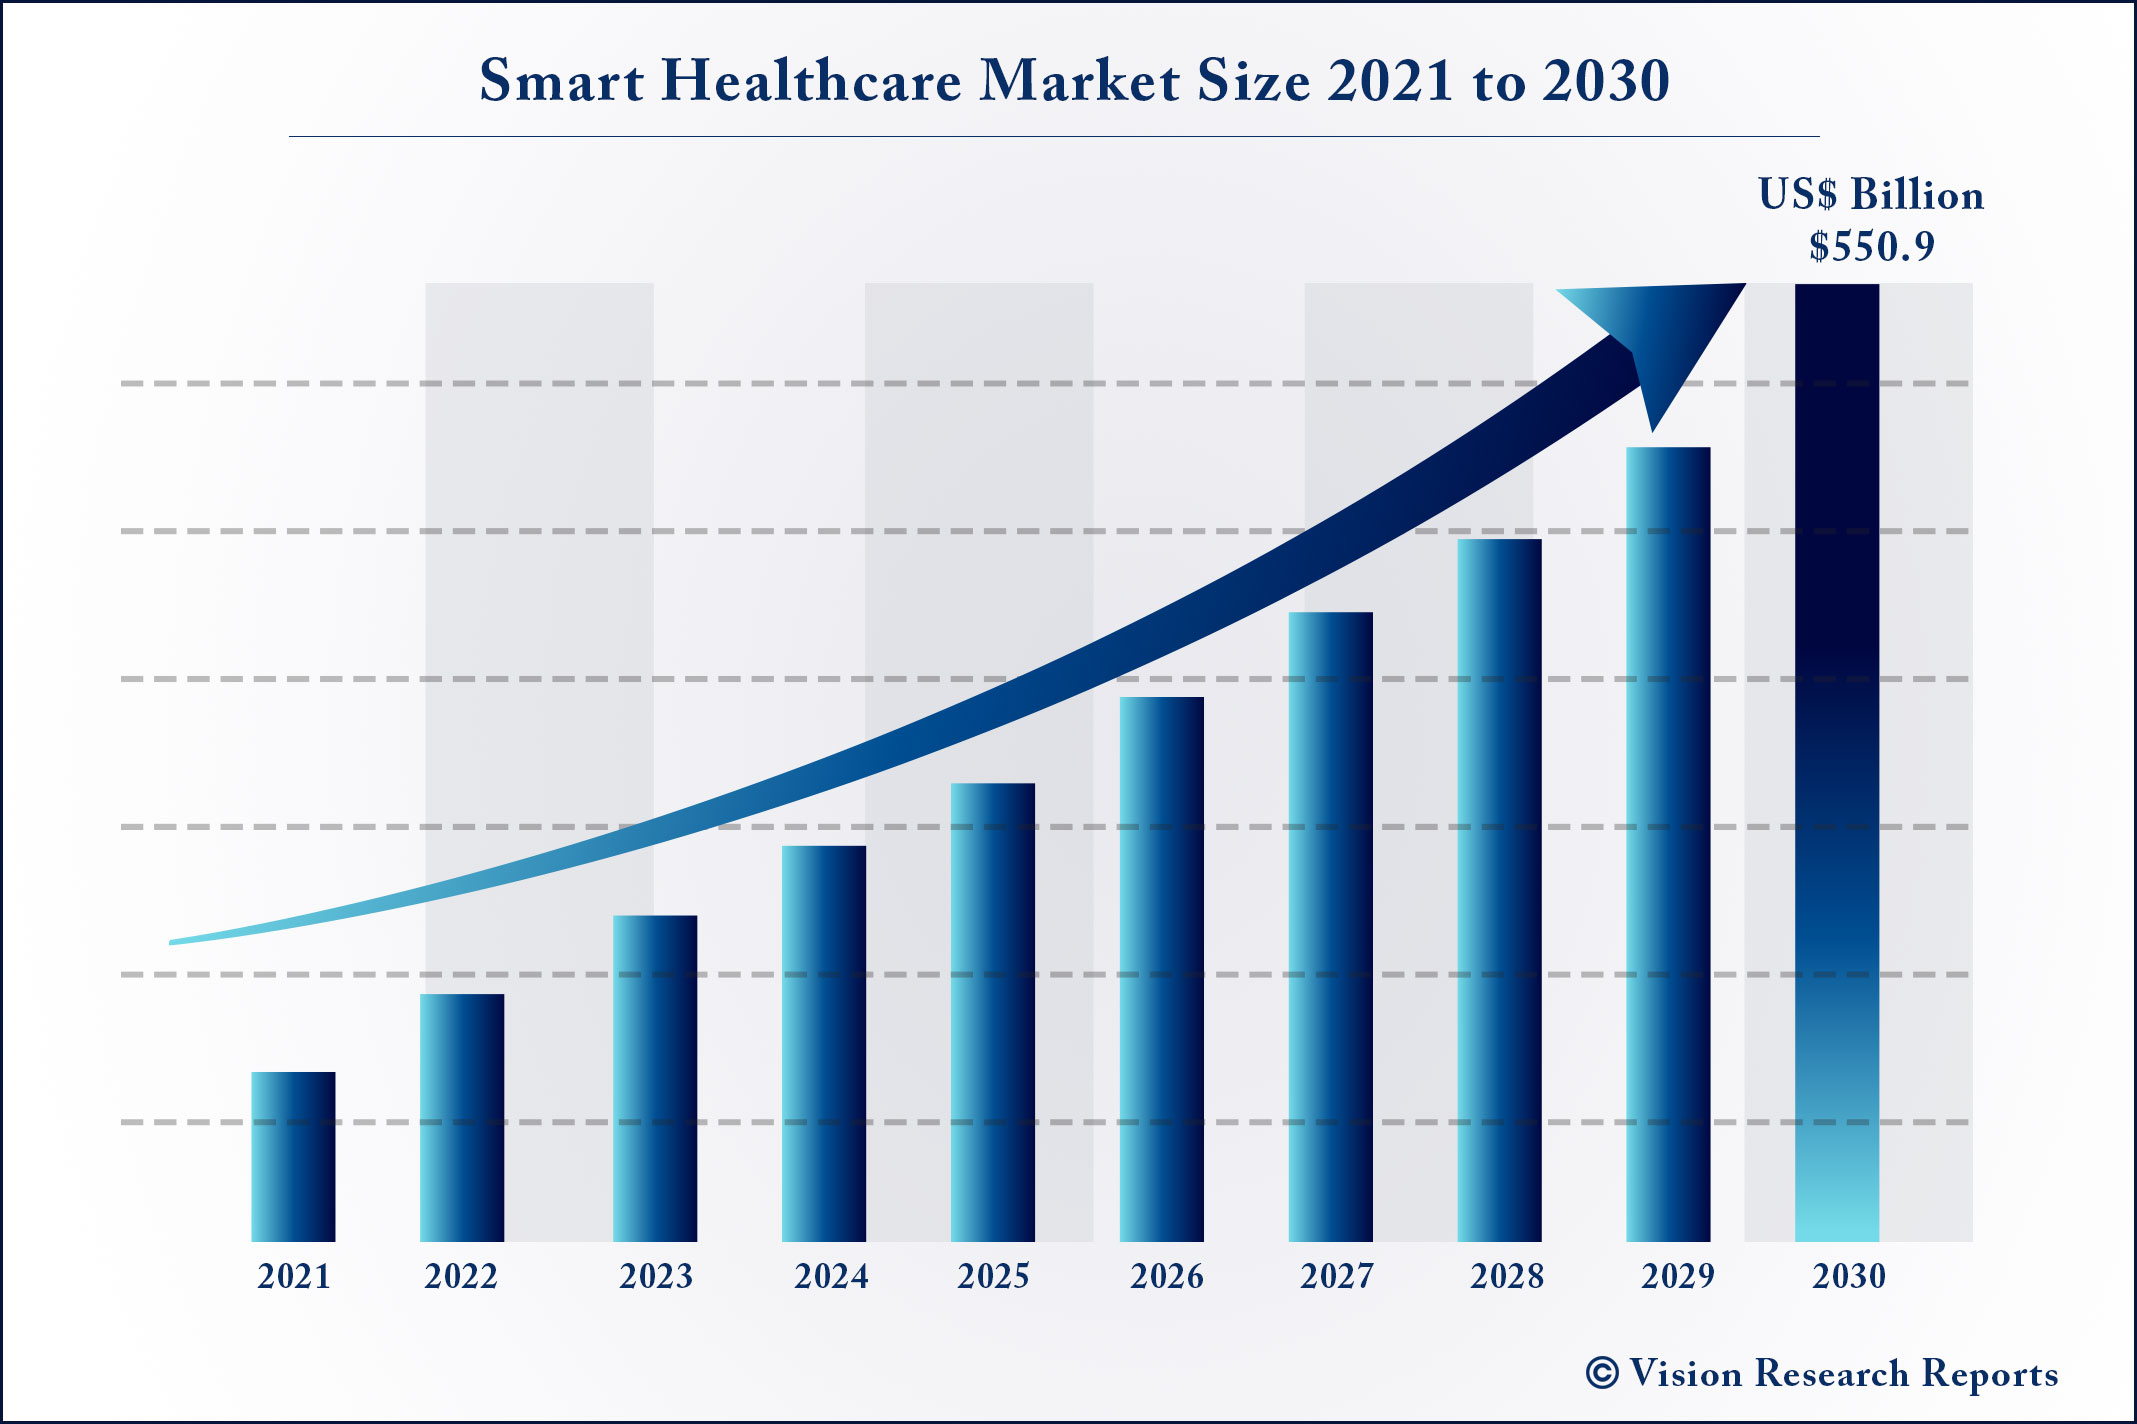 Smart Healthcare Market Size 2021 to 2030